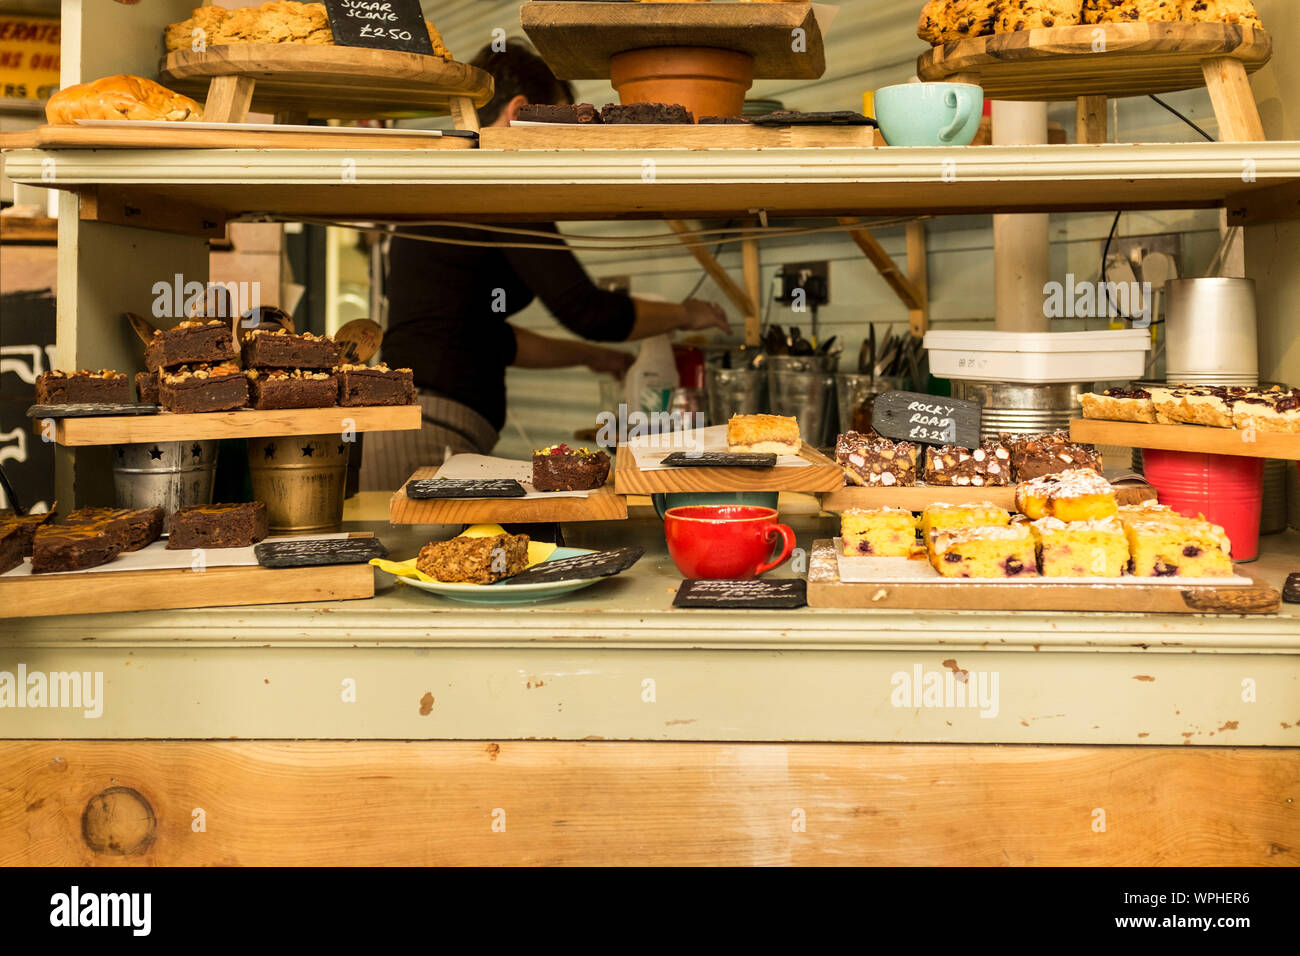 Display of various types of cakes in a cafe, Gloucestershire, UK Stock Photo